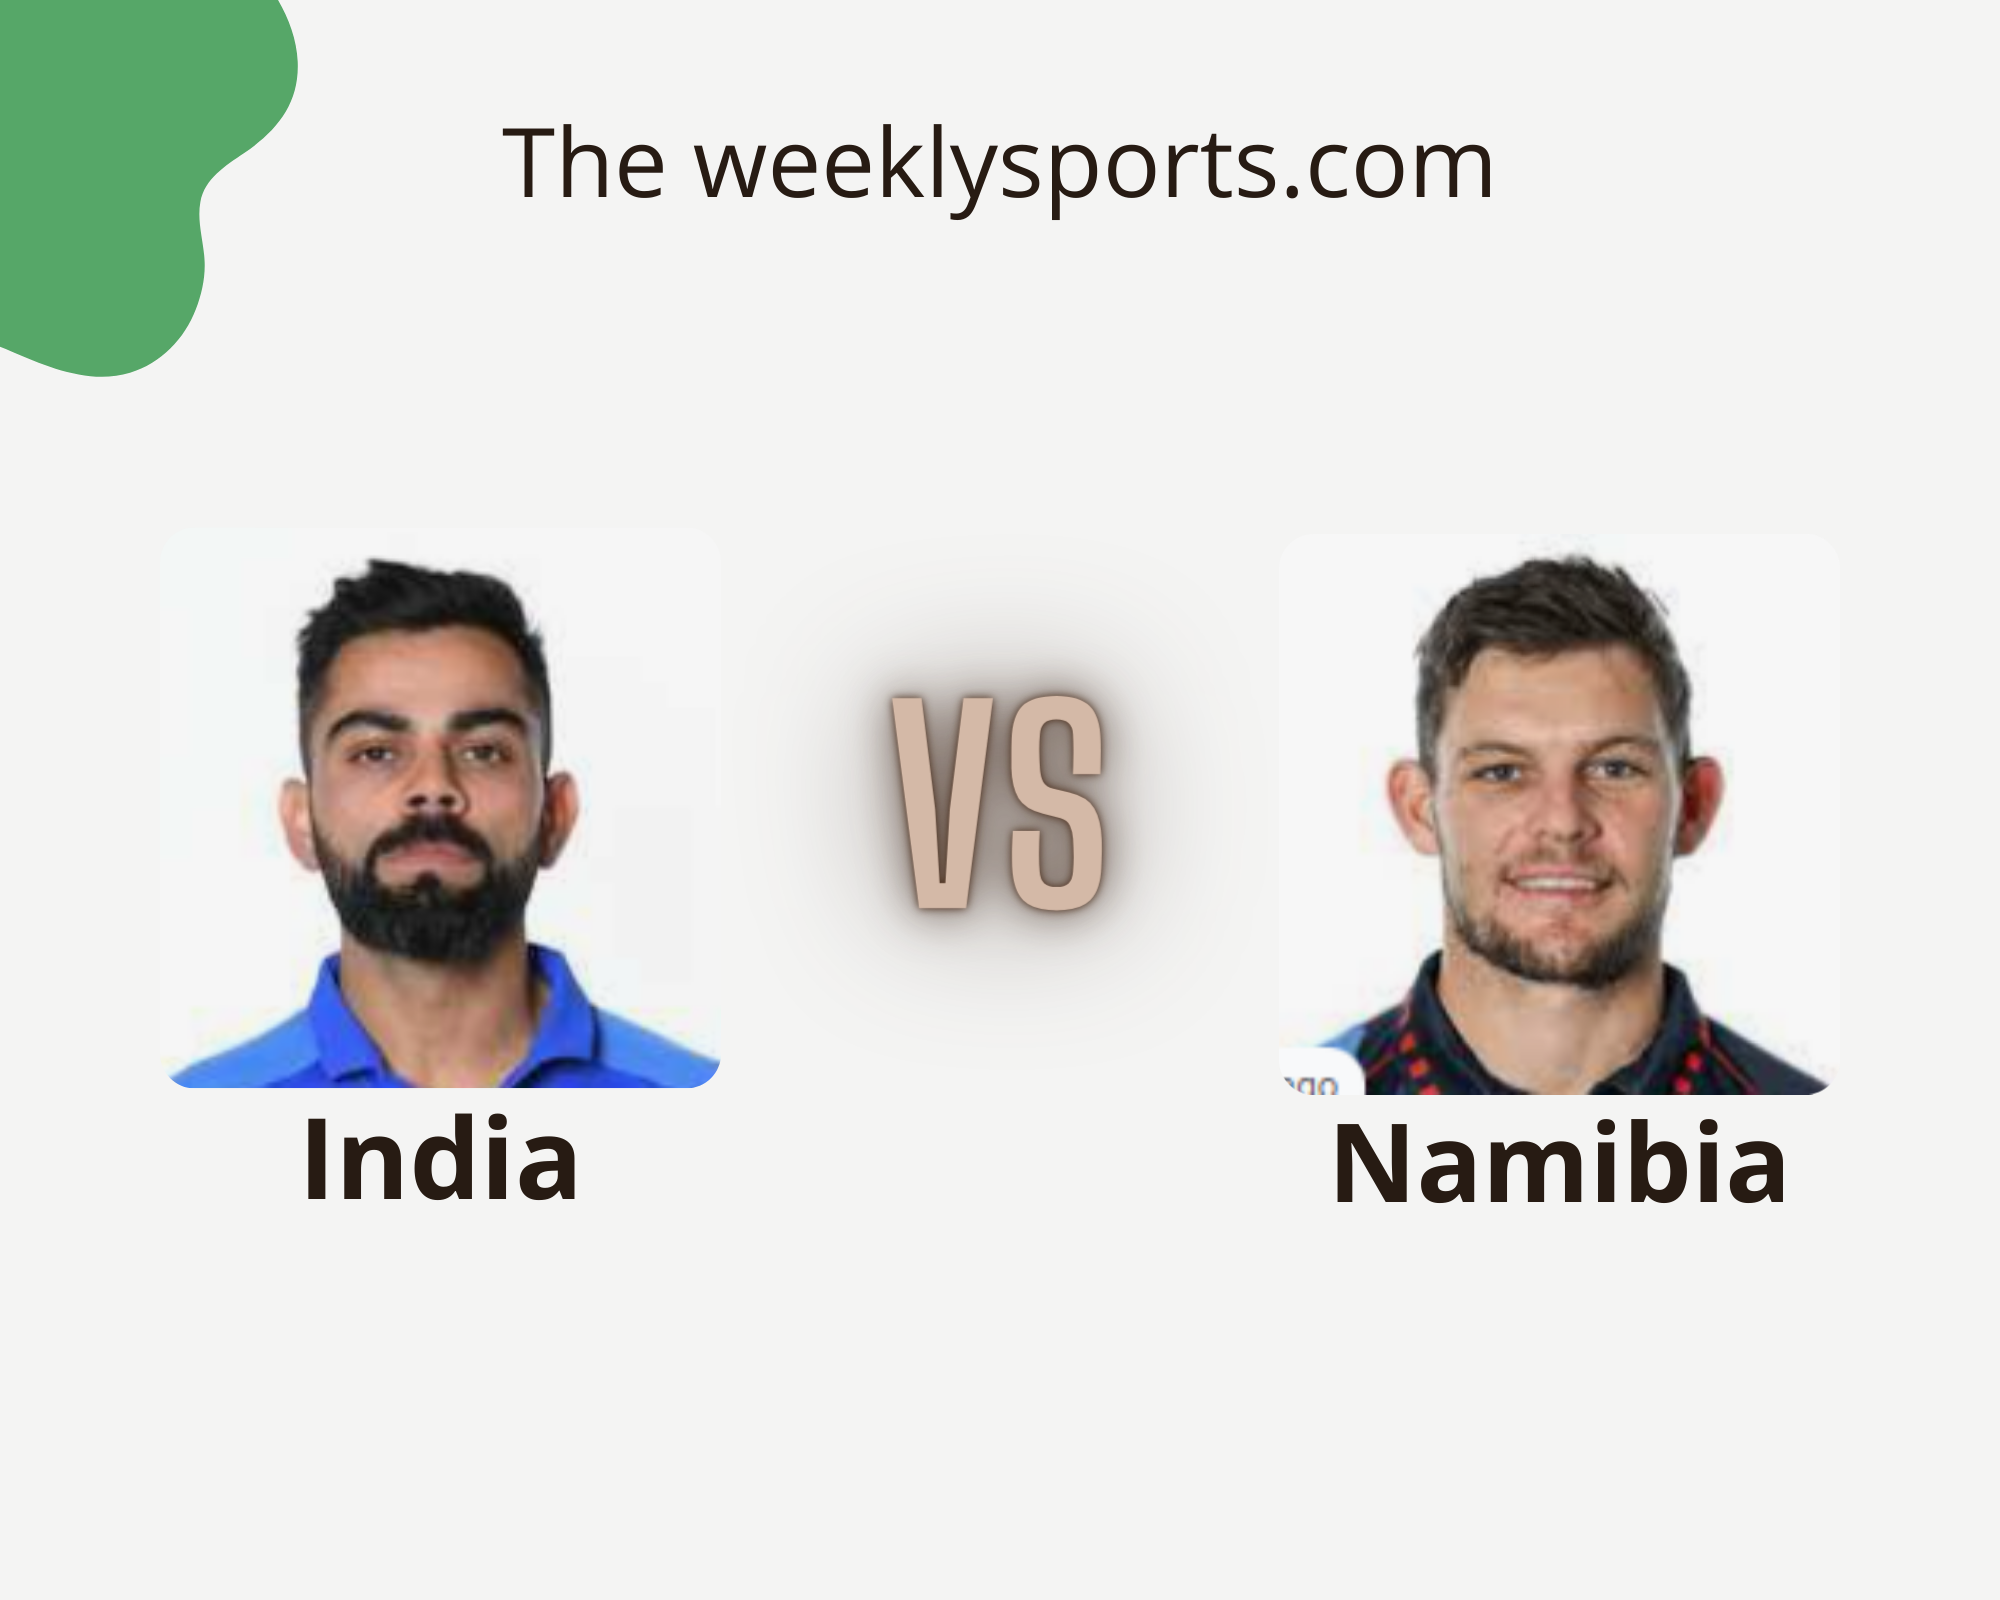 India vs Namibia head to head batting and bowling stats